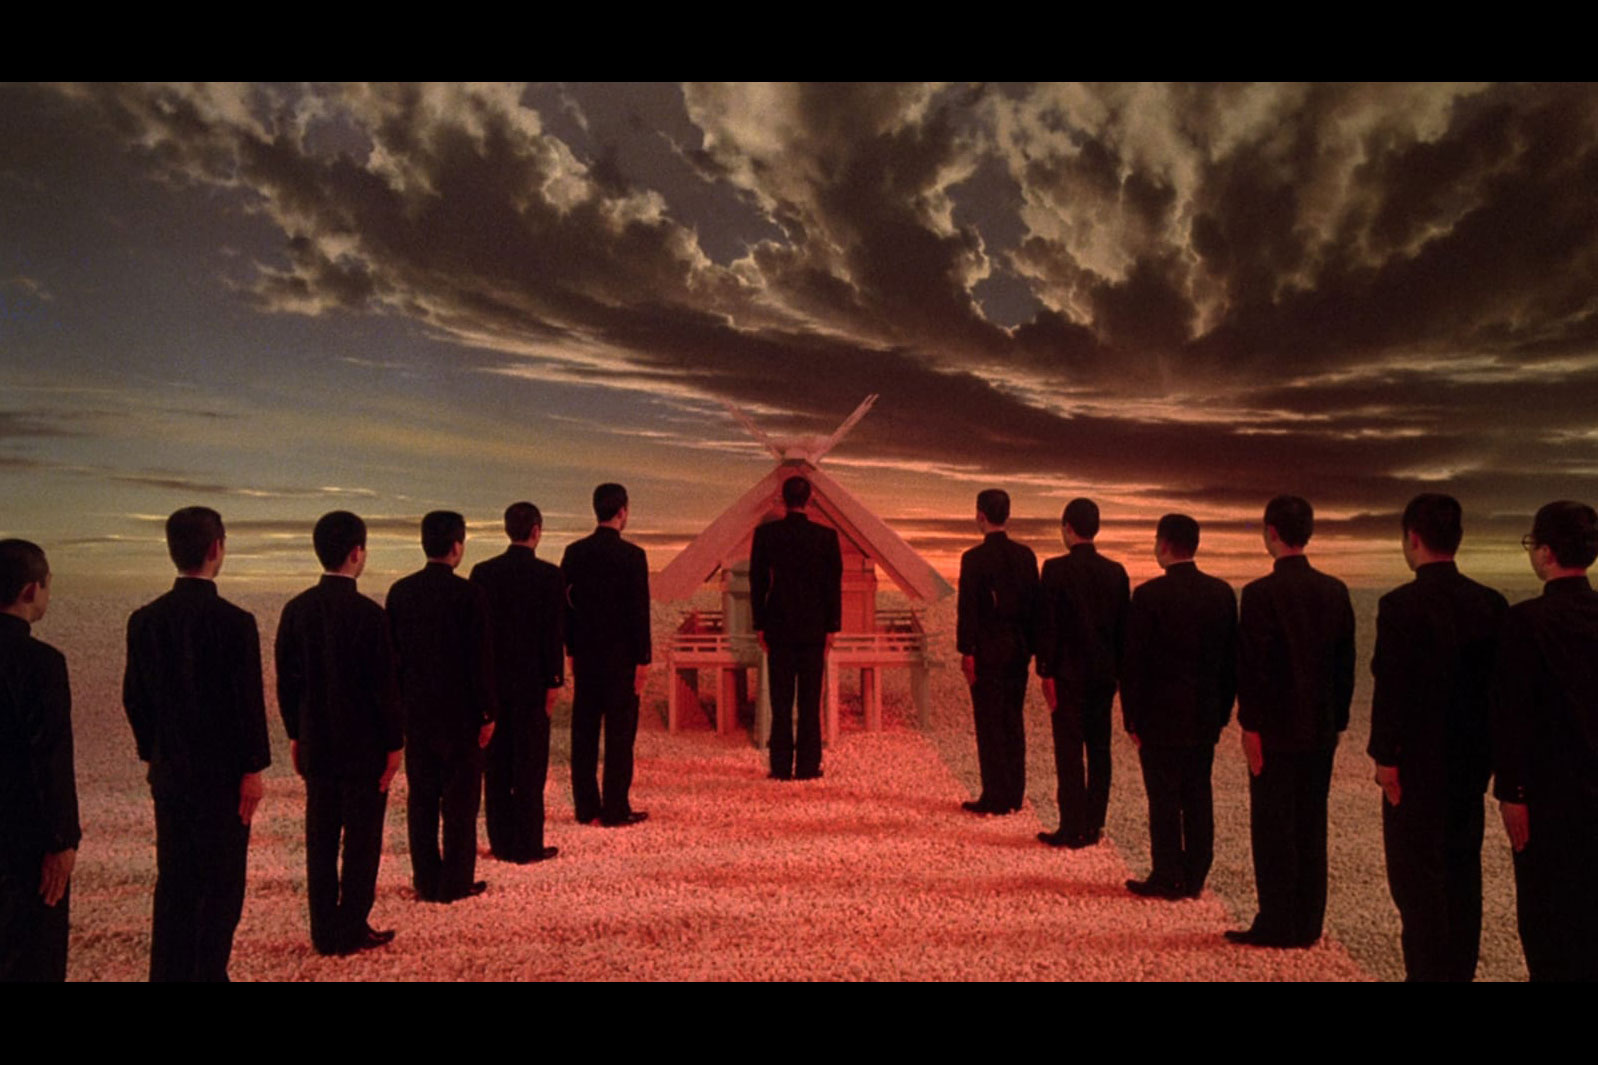 Thirteen men dressed in black in a surreal landscape standing with backs to the camera in a 'V' formation with one man at the point, facing an alter. 